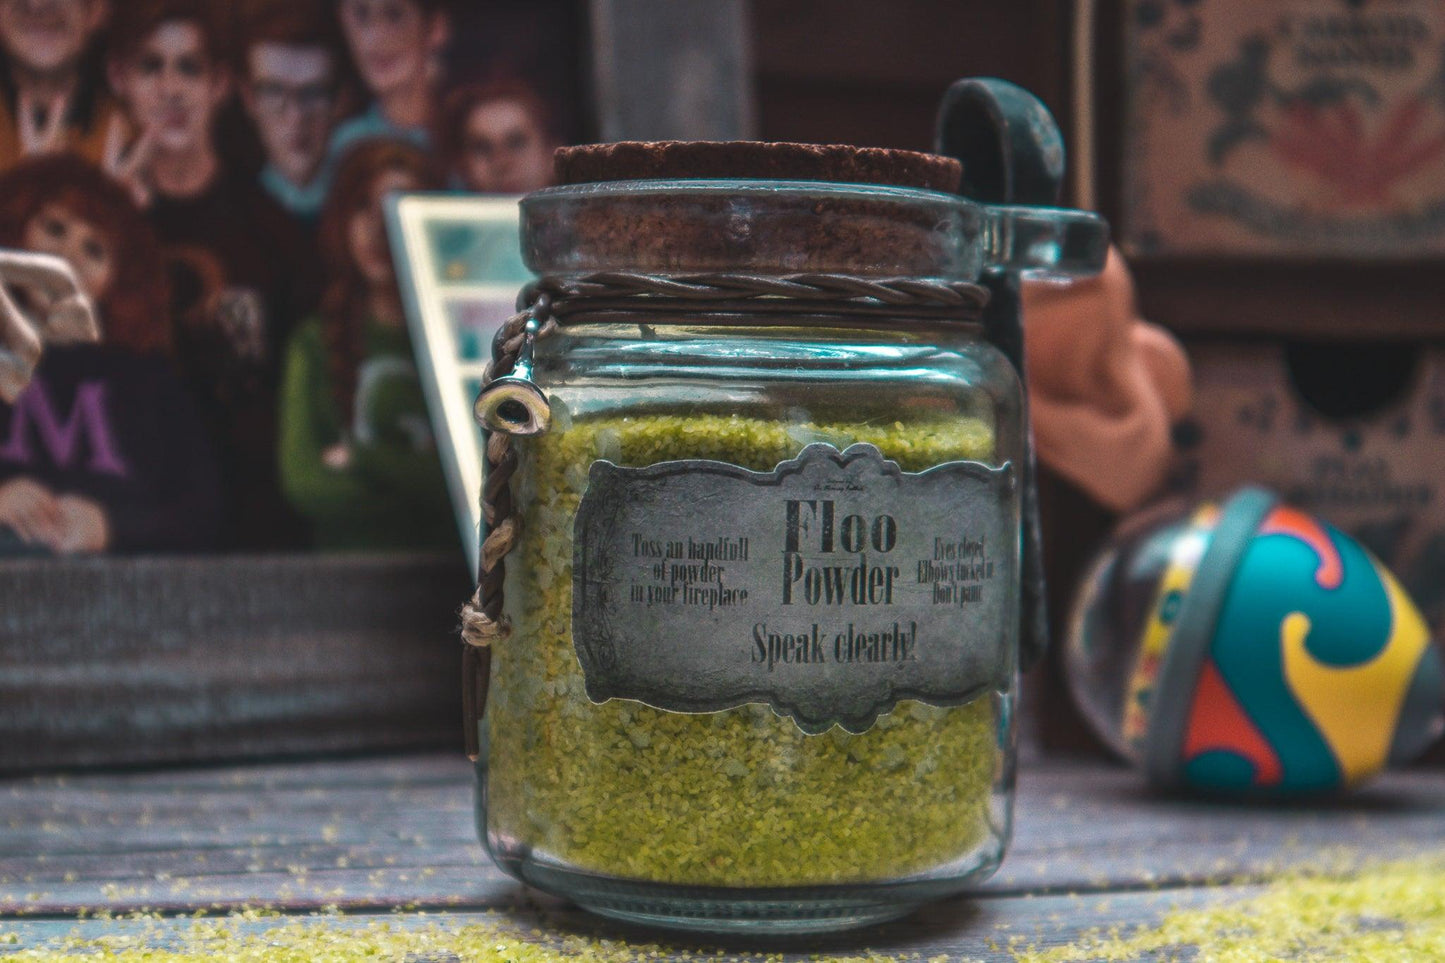 Floo Powder - The Flaming Feather & Flaming Filament